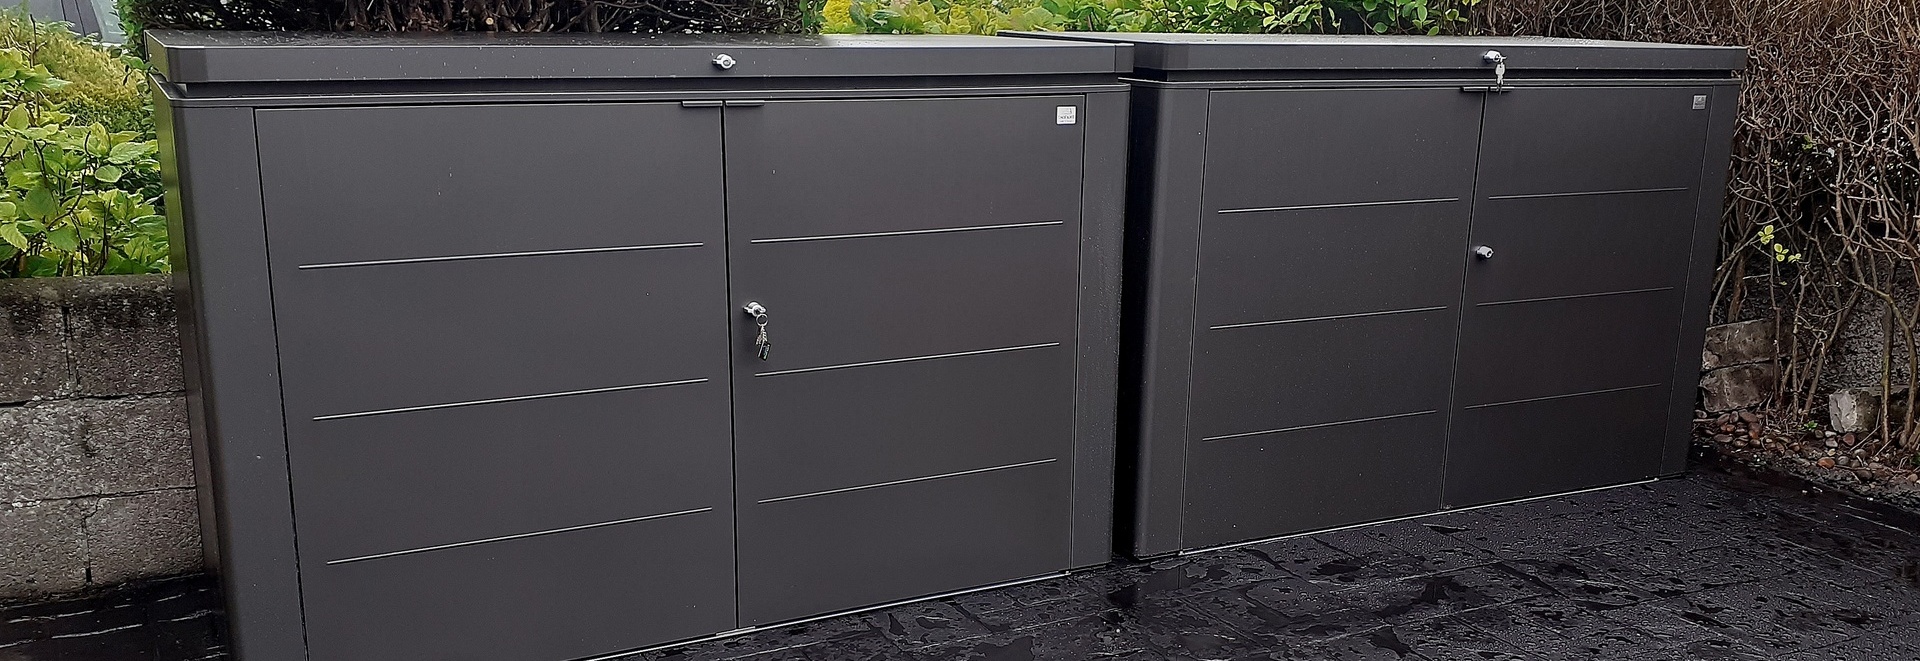 Biohort HighBoard 200 Storage Unit. Strong. Stylish. Durable. Storage for Bins, Bikes etc  | Supplied + Fitted in Raheny, Dublin 5 by Owen Chubb Landscapers.